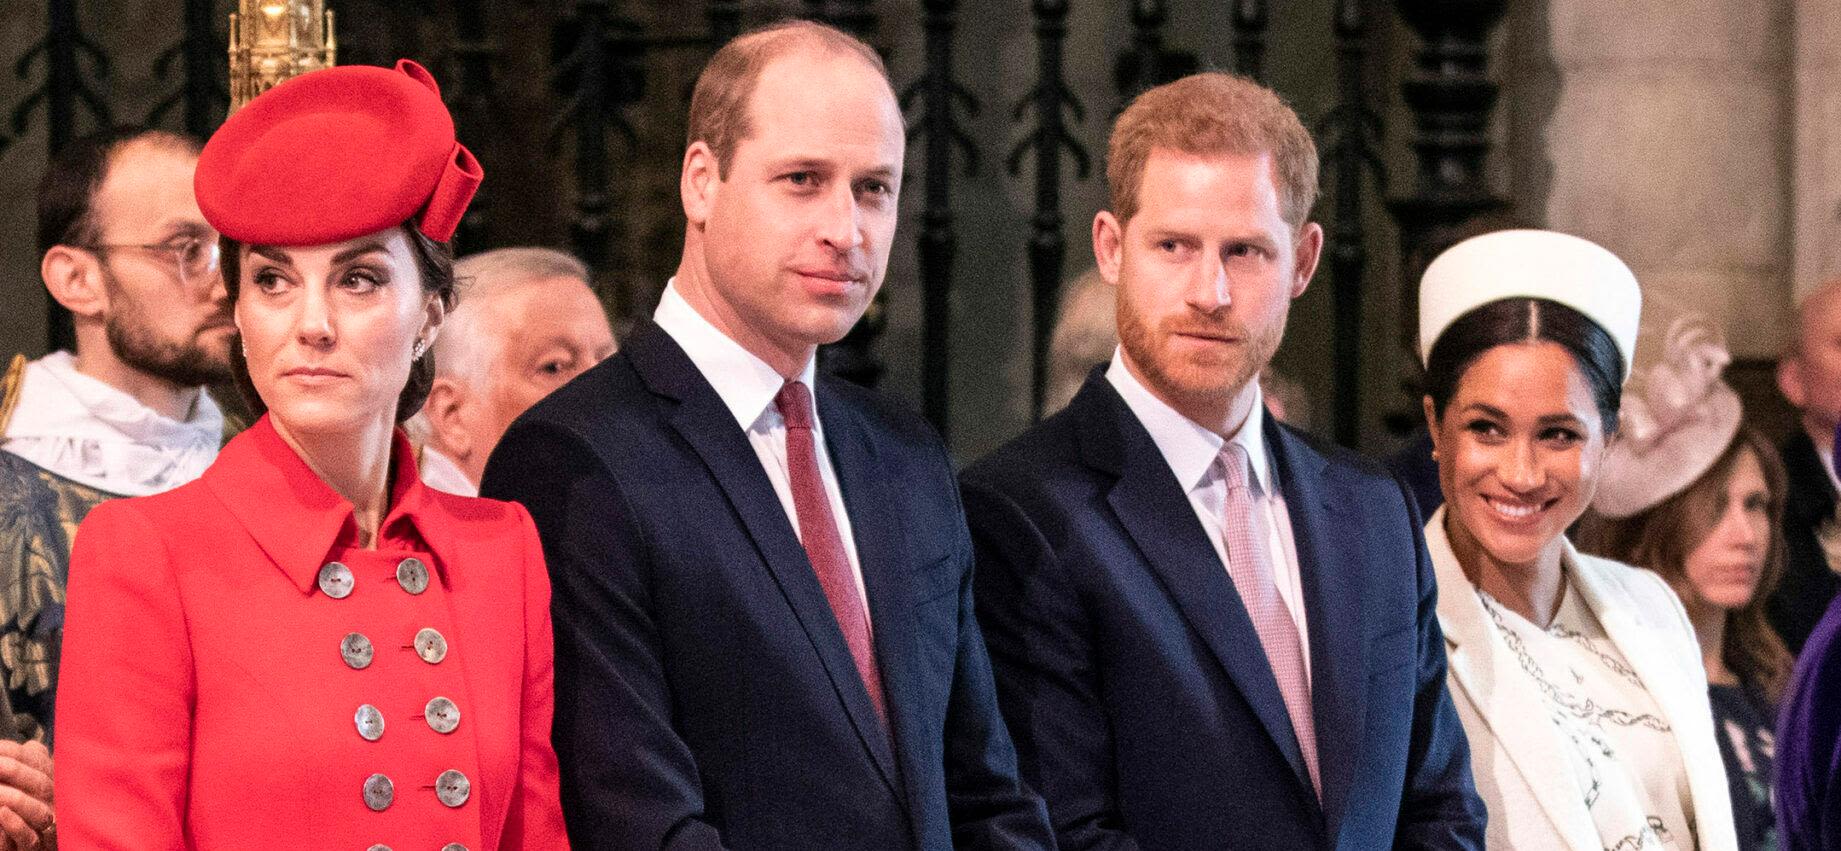 Prince William's 'Absence' Amid Kate's Cancer Battle Allegedly 'Makes Things More Difficult'